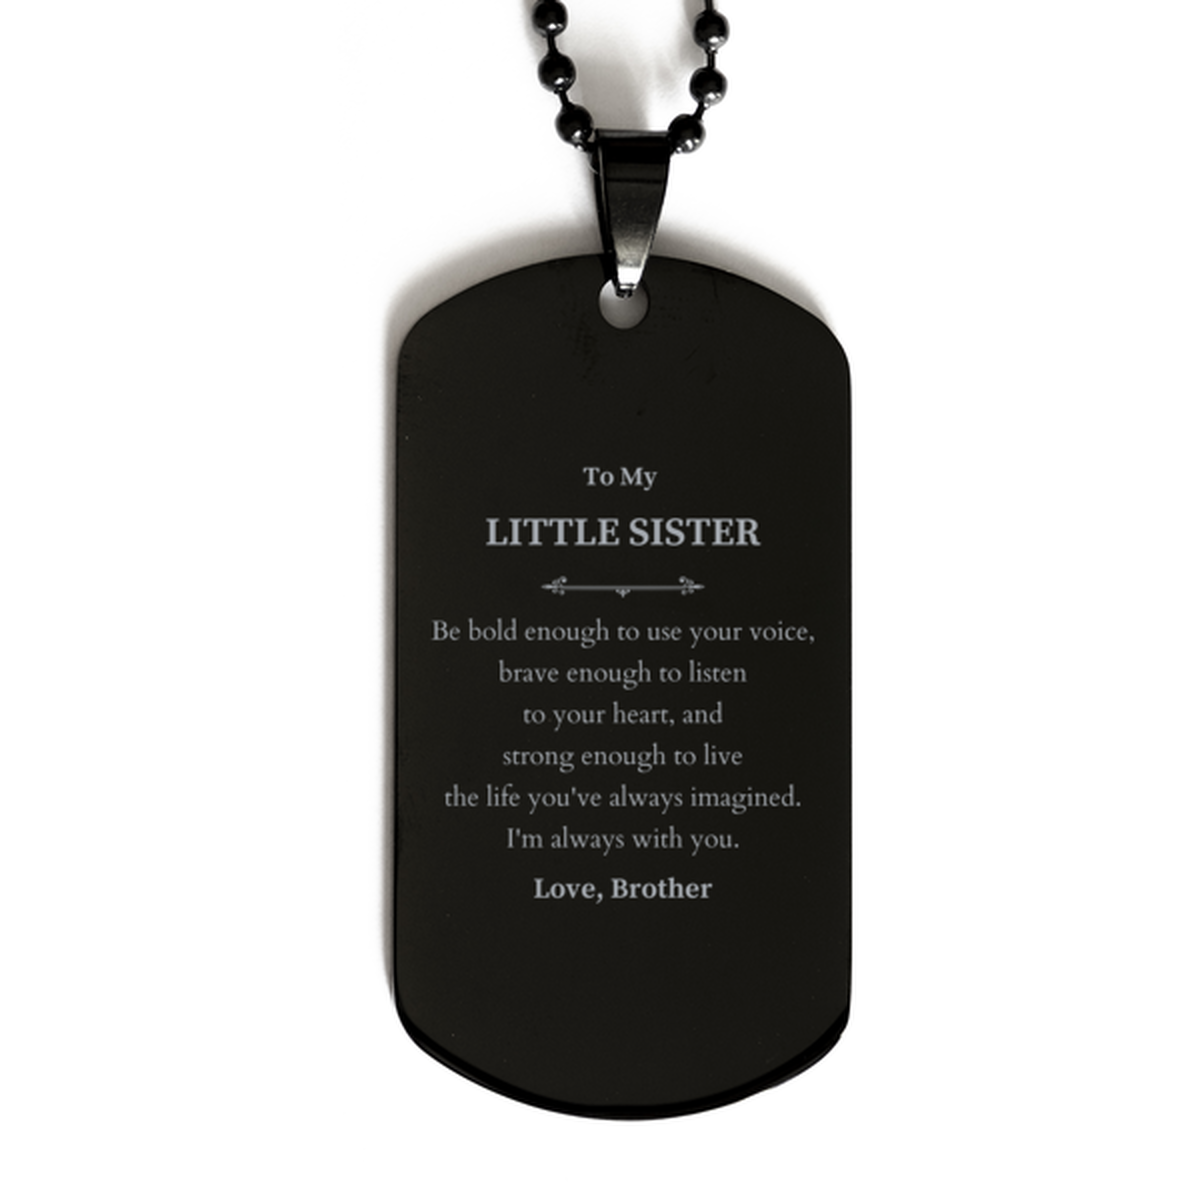 Keepsake Little Sister Black Dog Tag Gift Idea Graduation Christmas Birthday Little Sister from Brother, Little Sister Be bold enough to use your voice, brave enough to listen to your heart. Love, Brother